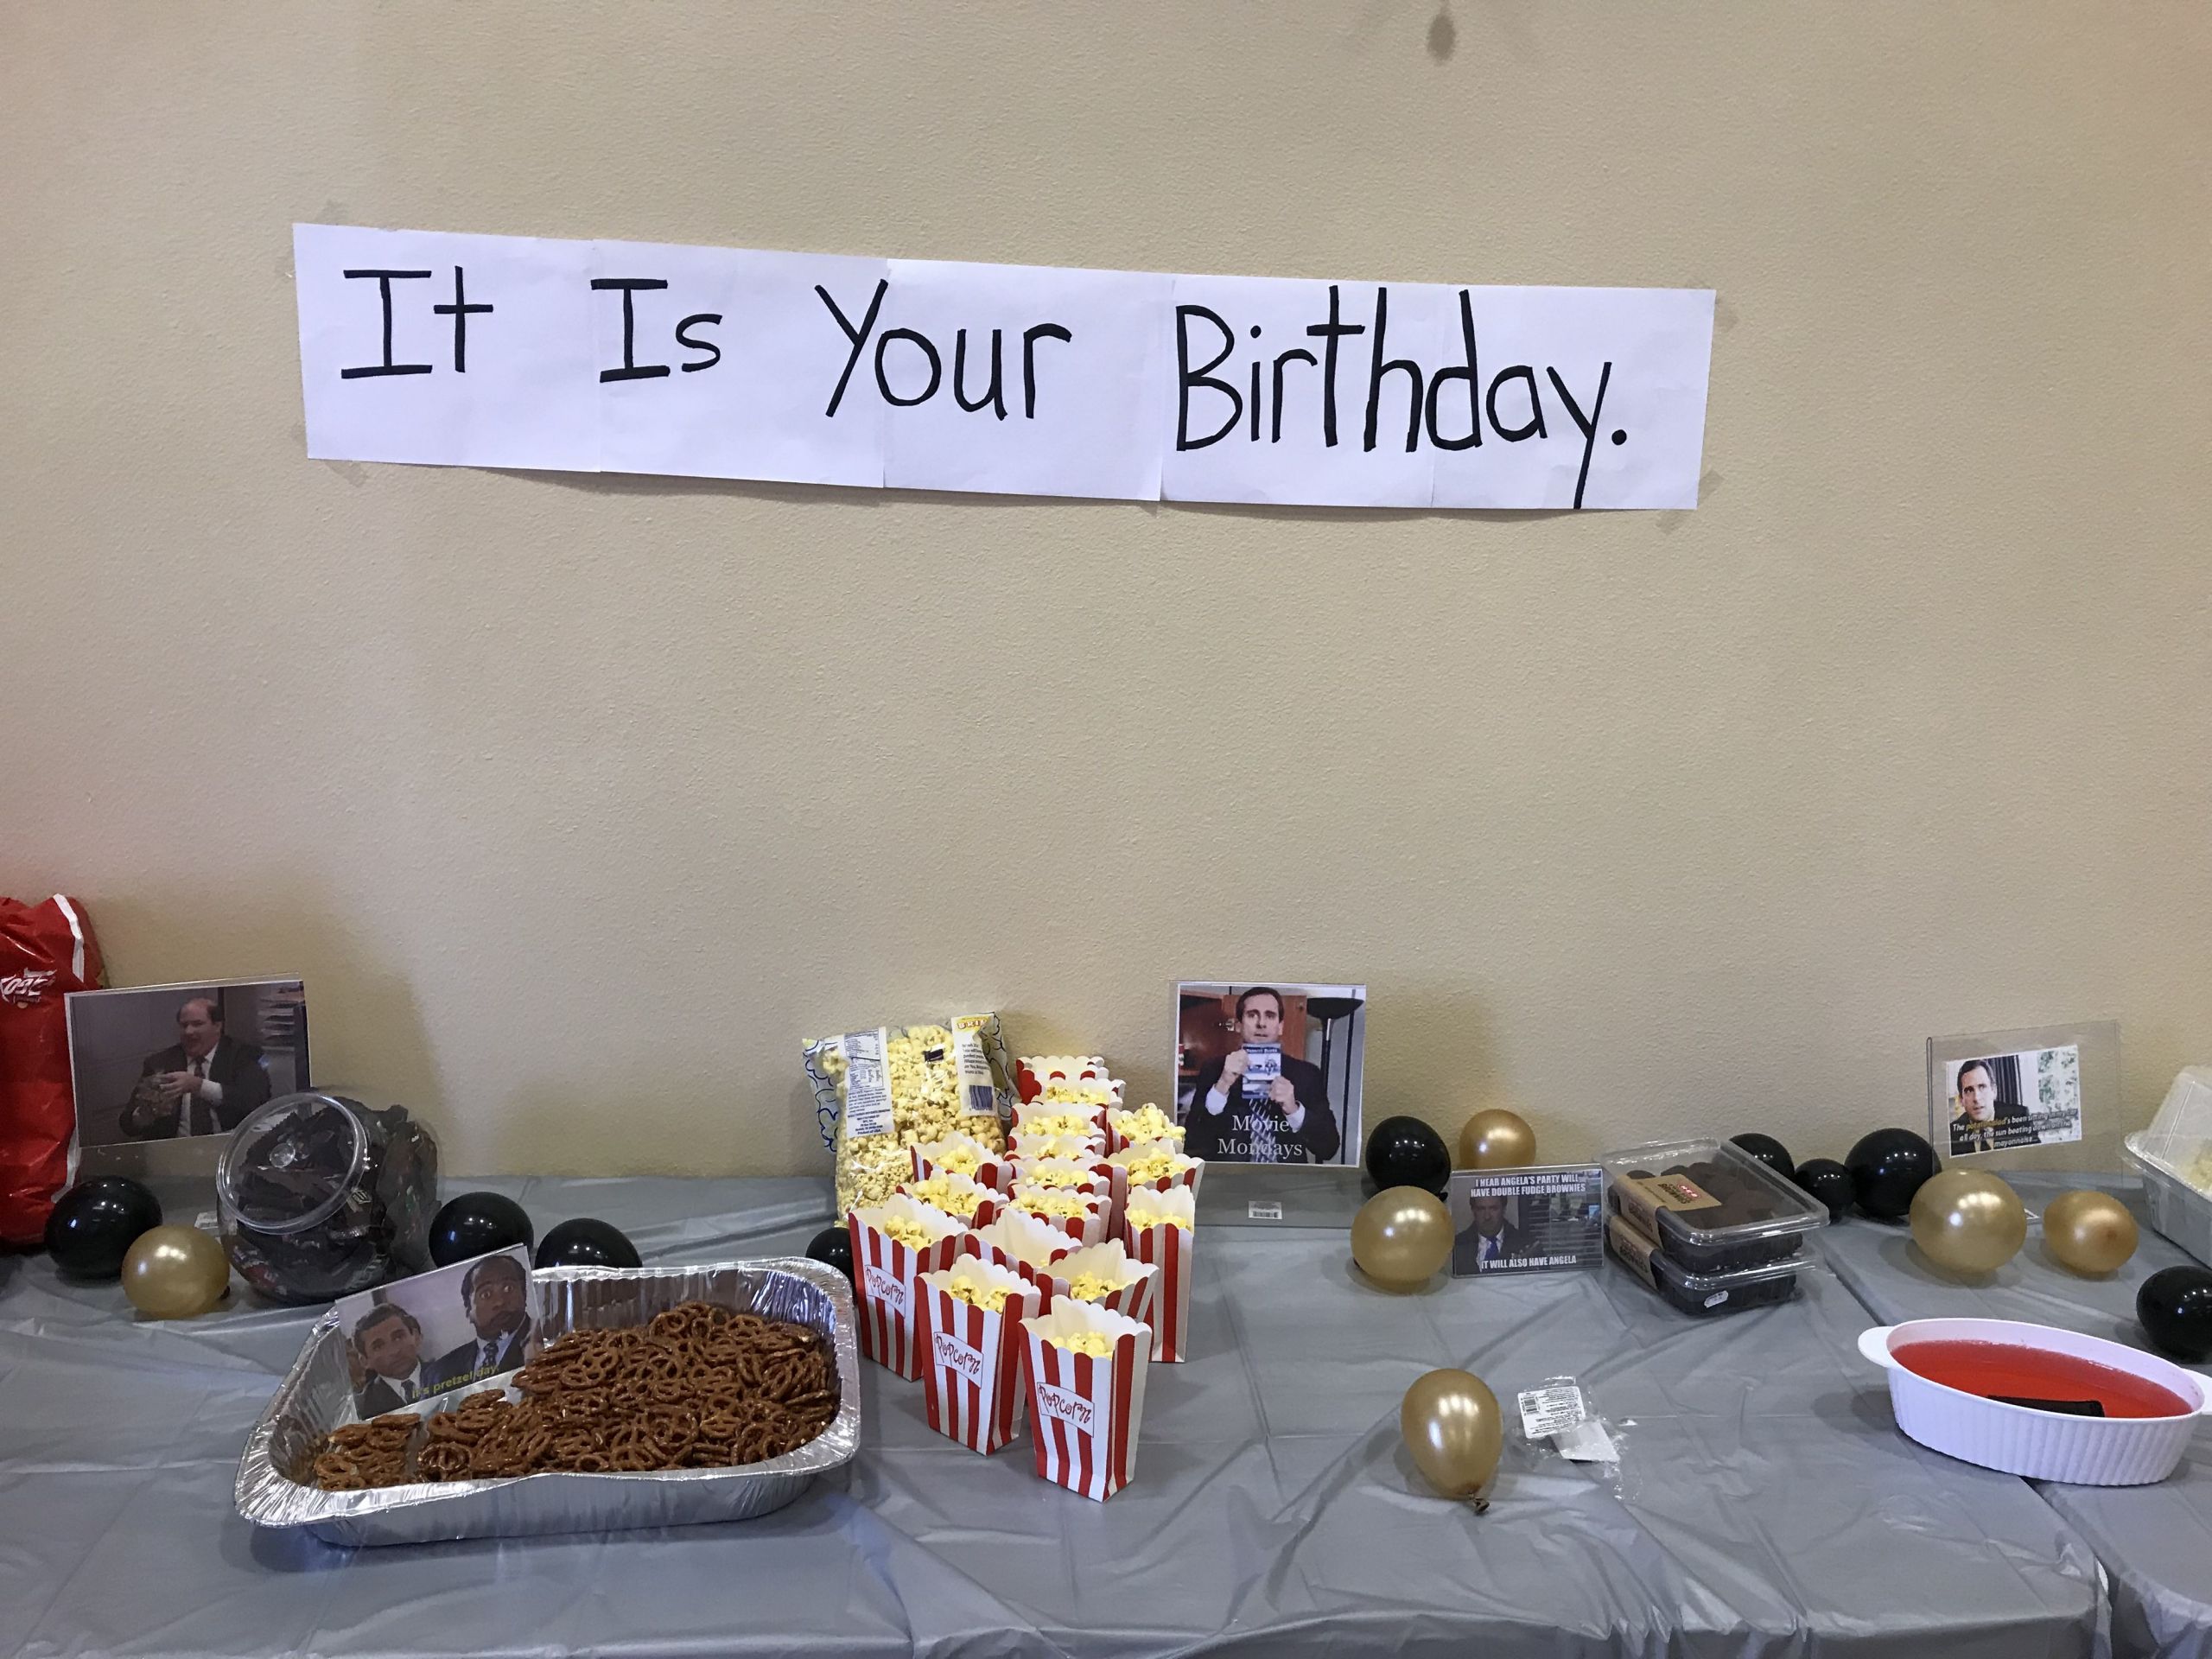 The Office Tv Show Birthday Party Ideas
 The fice birthday party